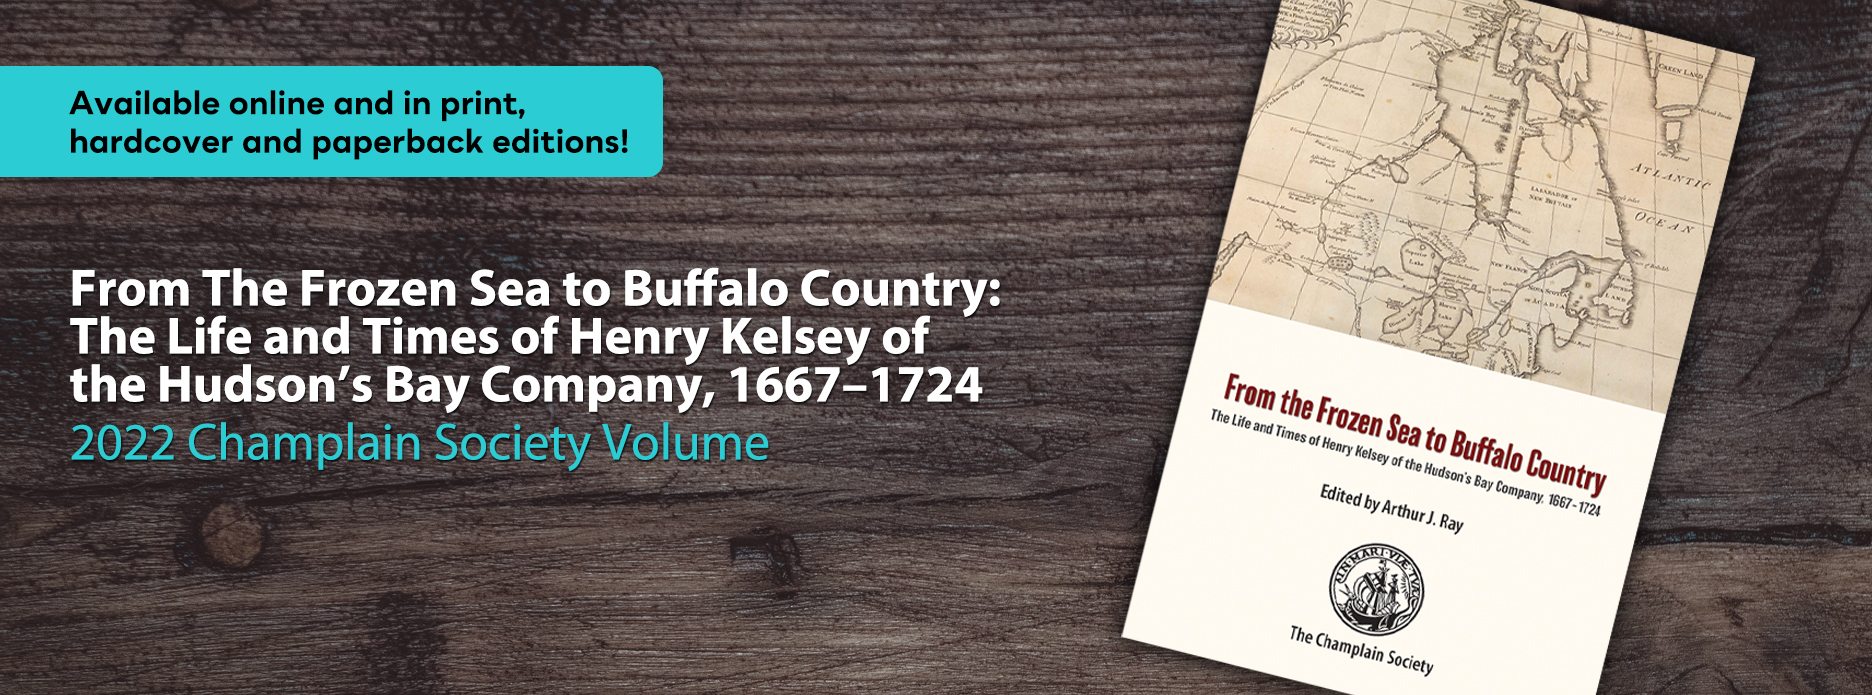 Image of a document, promotional text that reads Coming Soon From the Frozen Sea to Buffalo Country, The Life and Times of Henry Kelsey of the Hudson's Bay Company 1667-1724, 2022 Champlain Society Volume.